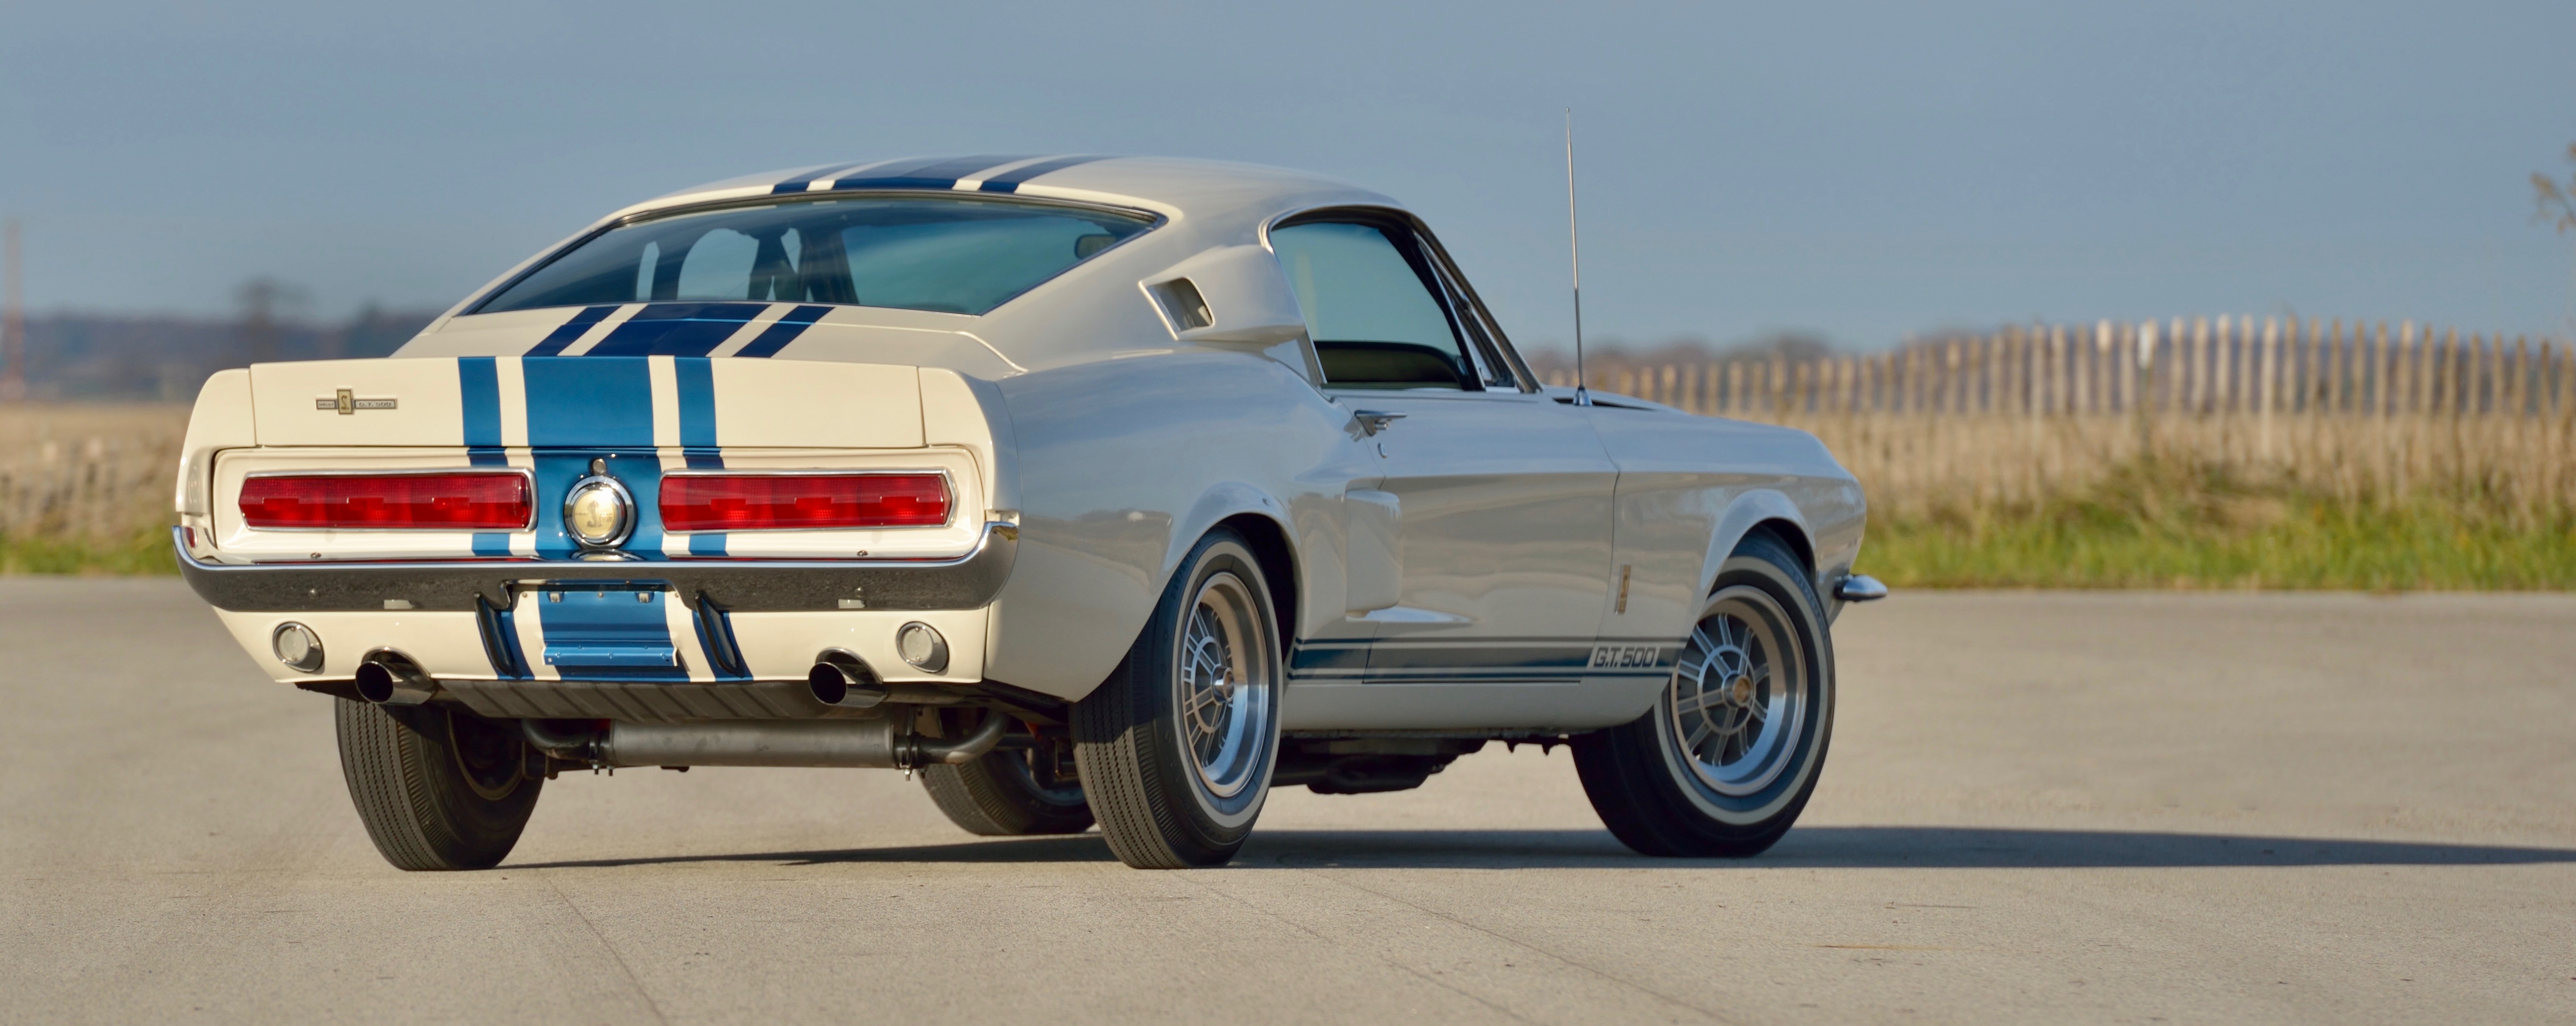 Super Snake, One-off GT500 Super Snake Mustang heading to auction, ClassicCars.com Journal